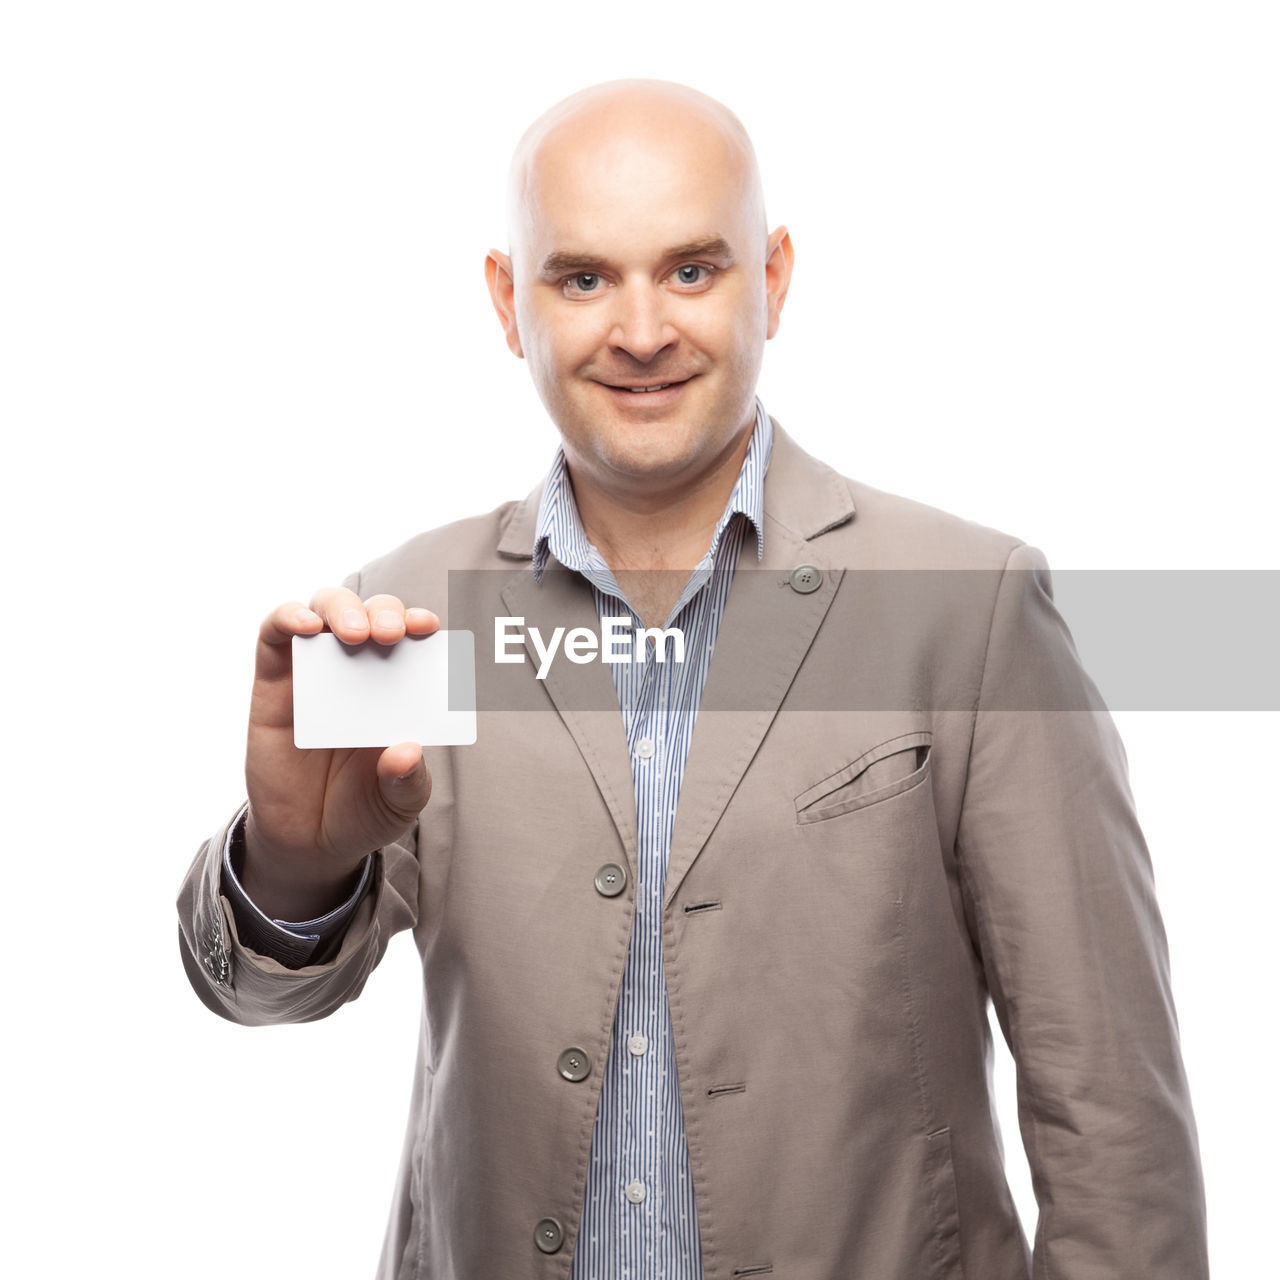 PORTRAIT OF SMILING MAN STANDING ON WHITE BACKGROUND